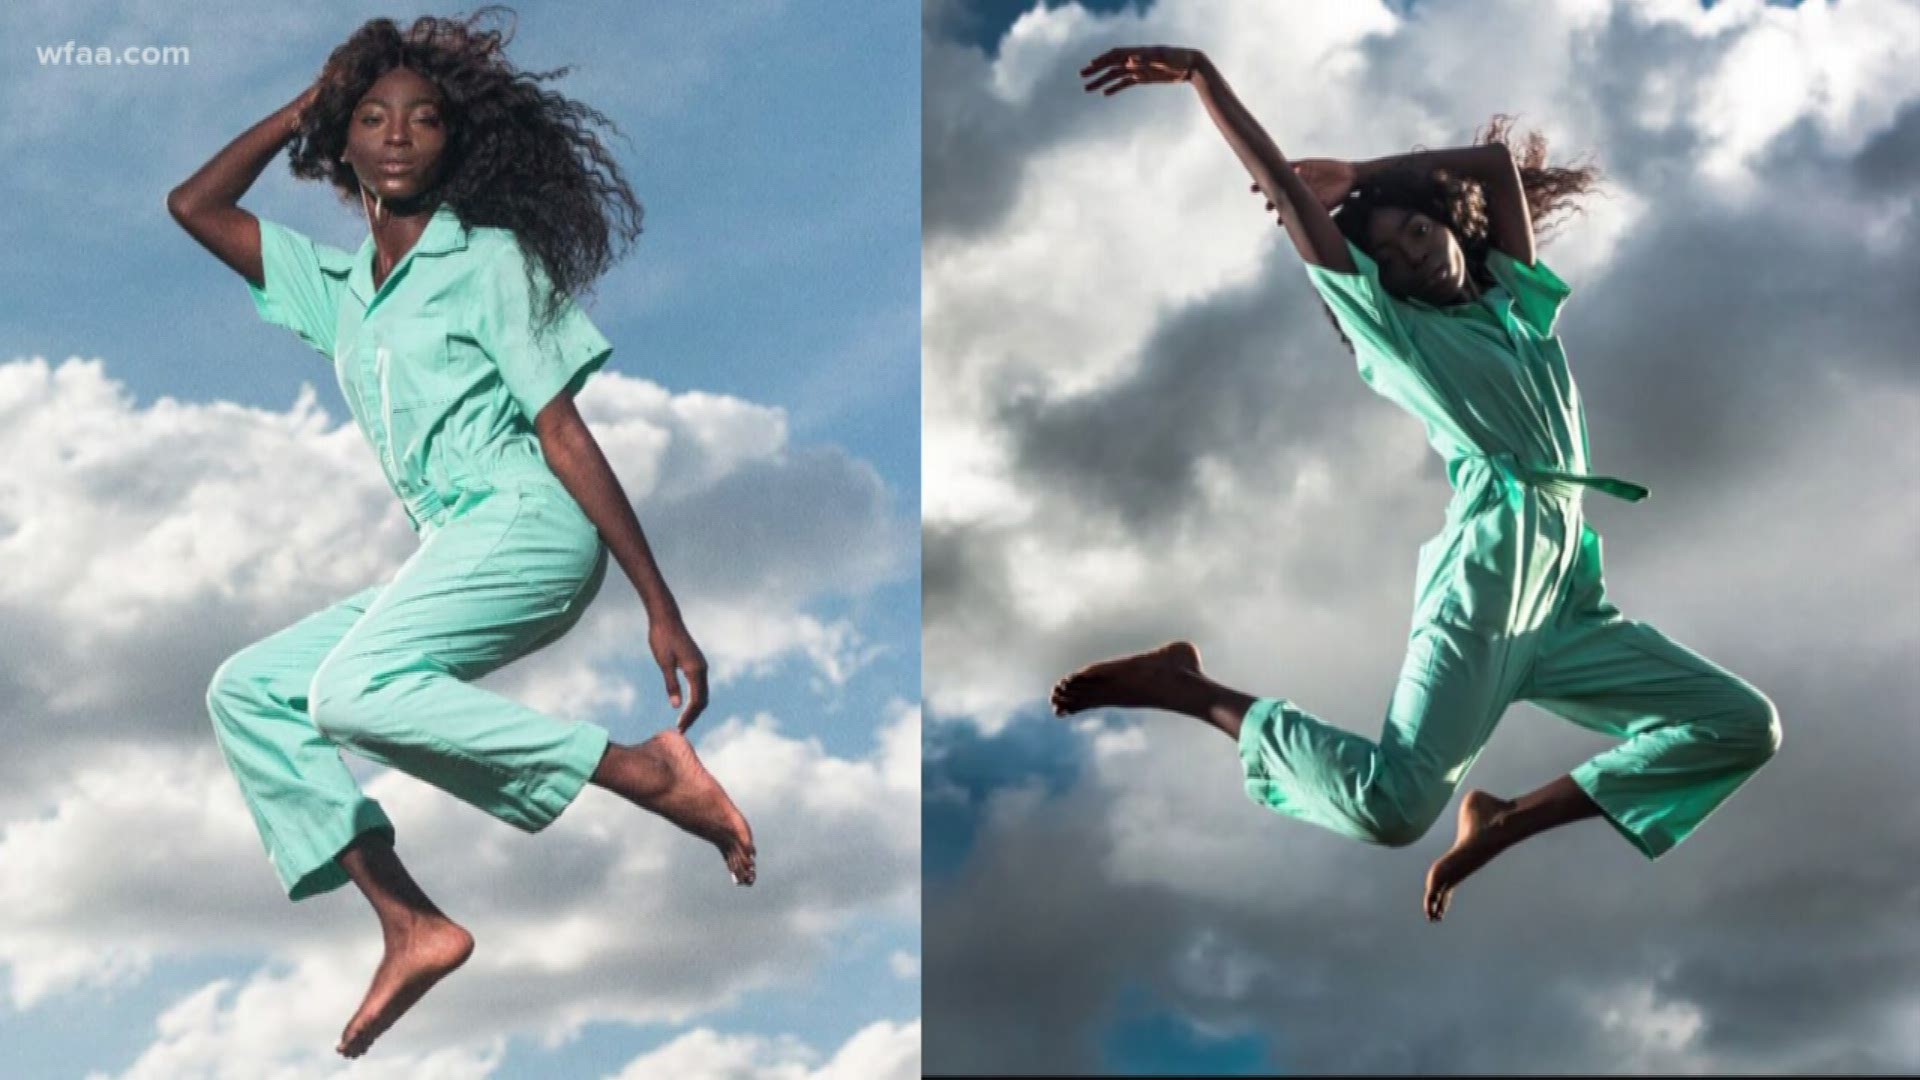 Students use trampoline for viral photo shoot